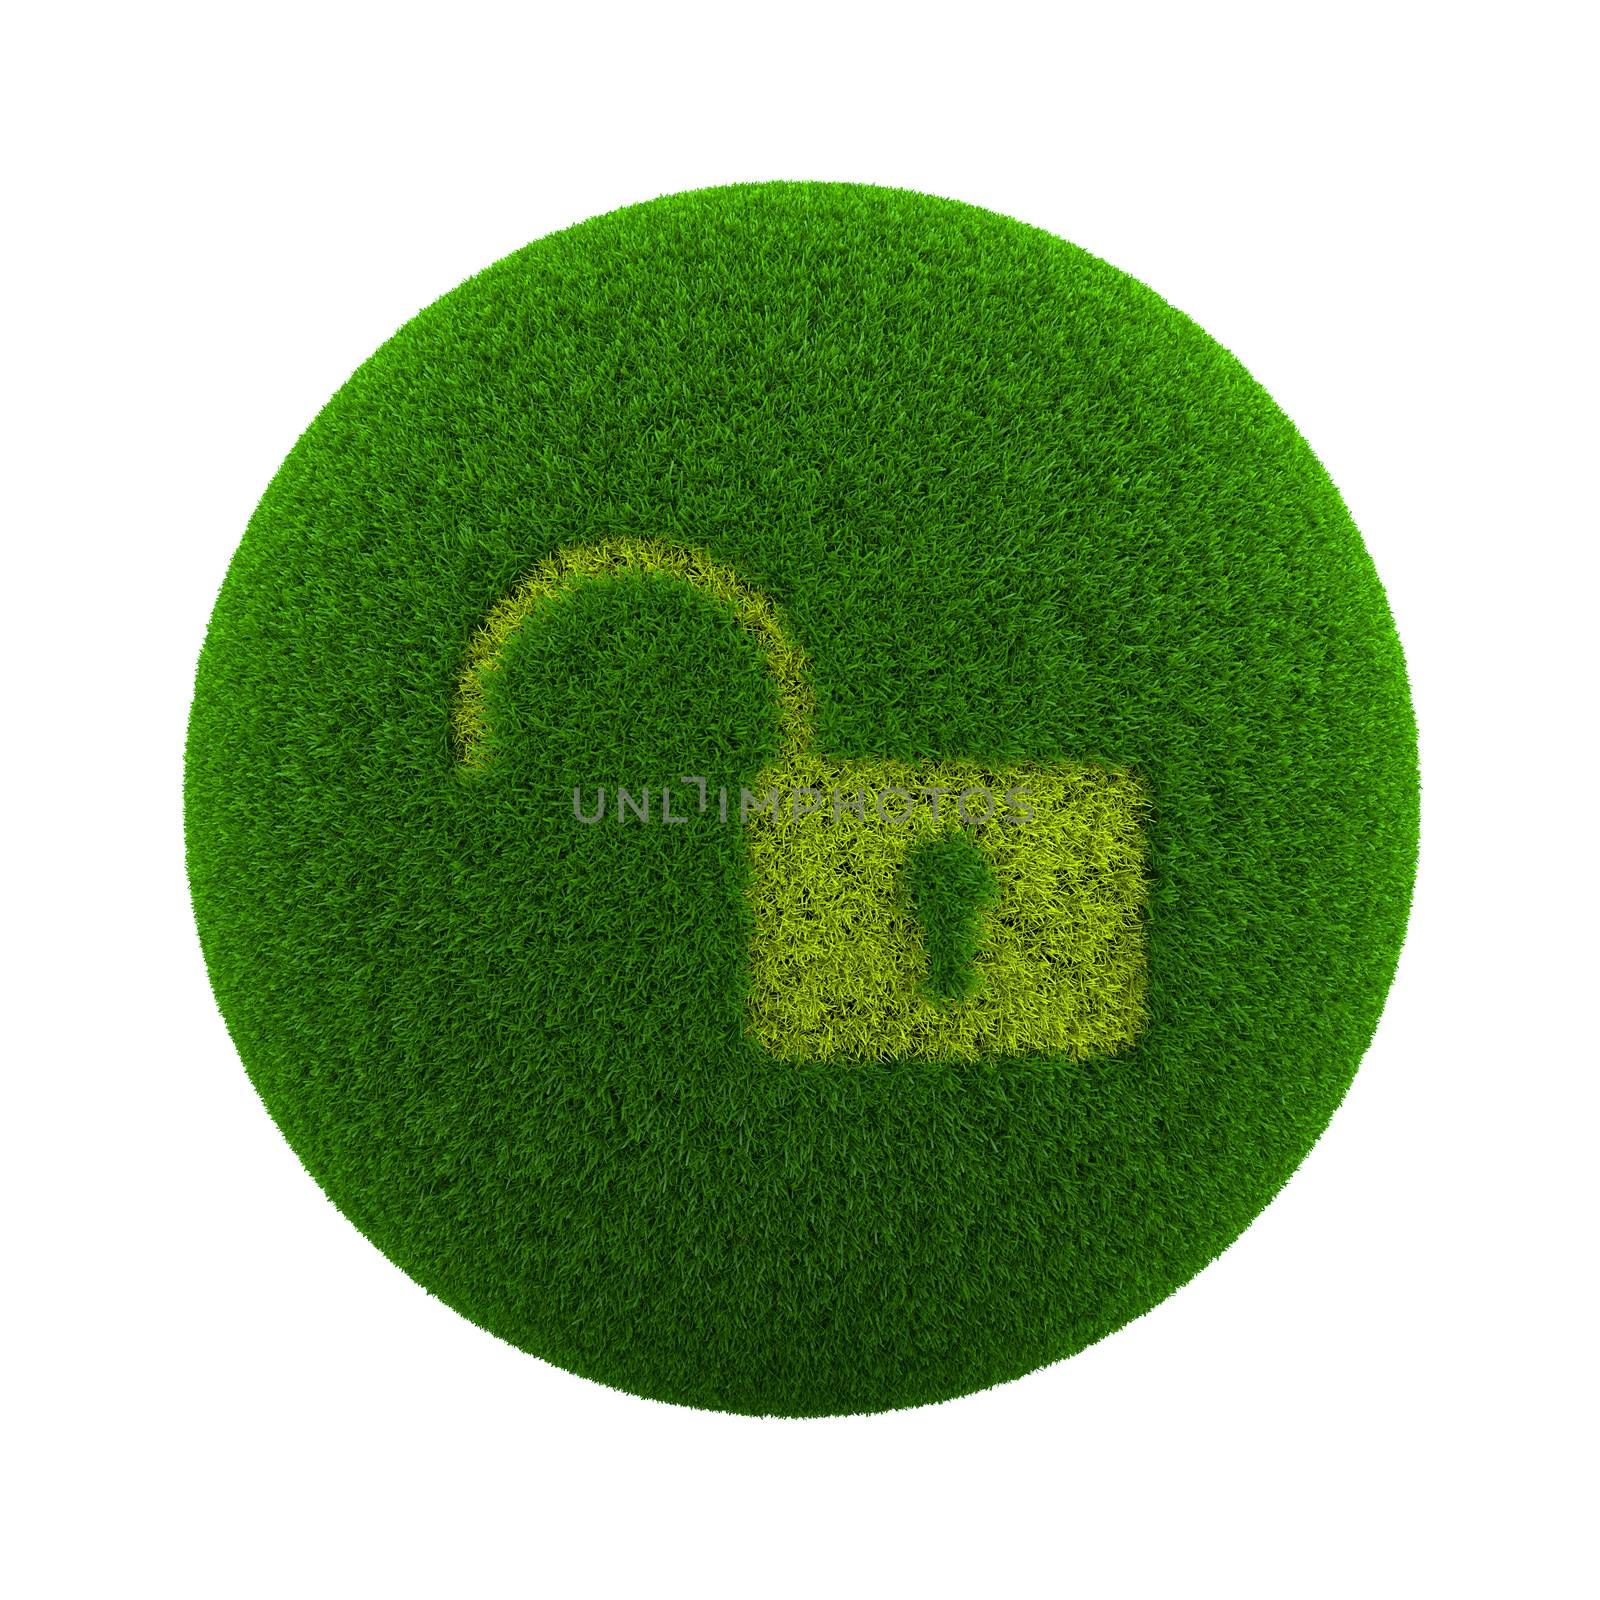 Grass Sphere Open Lock Icon by make